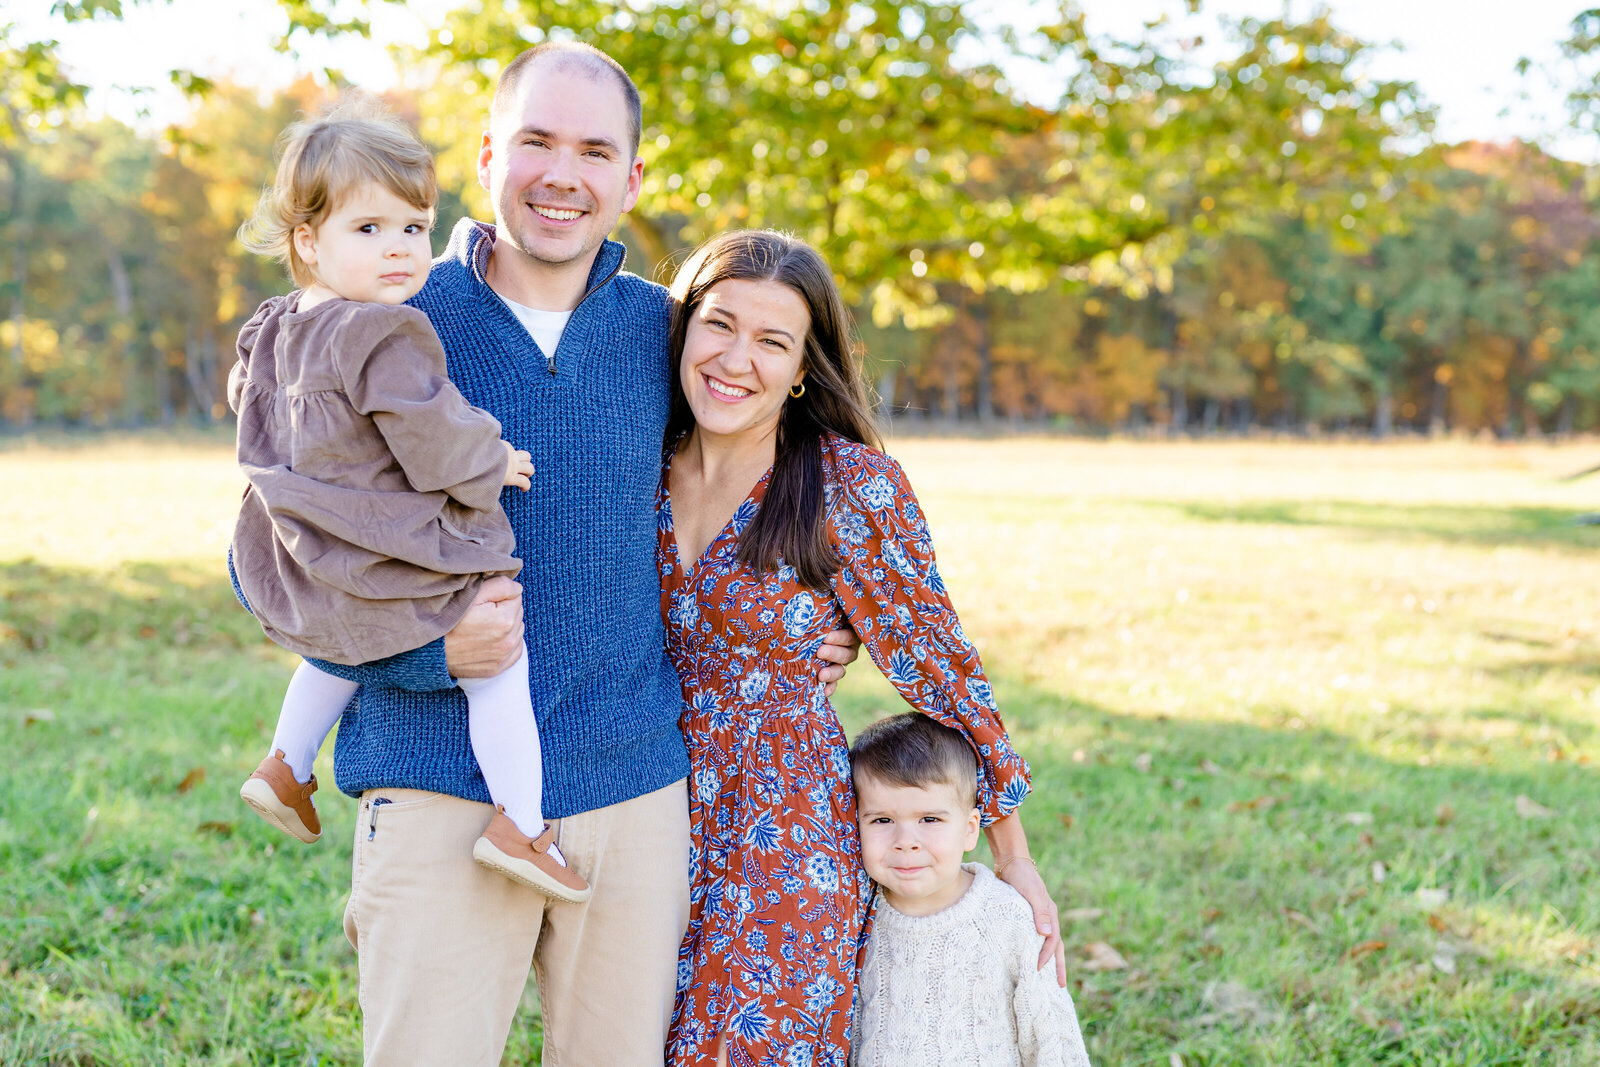 Light and Airy Fall Family Session at the Manassas Battlefield -Megan Hollada Photography - Northern Virginia Family Photographer